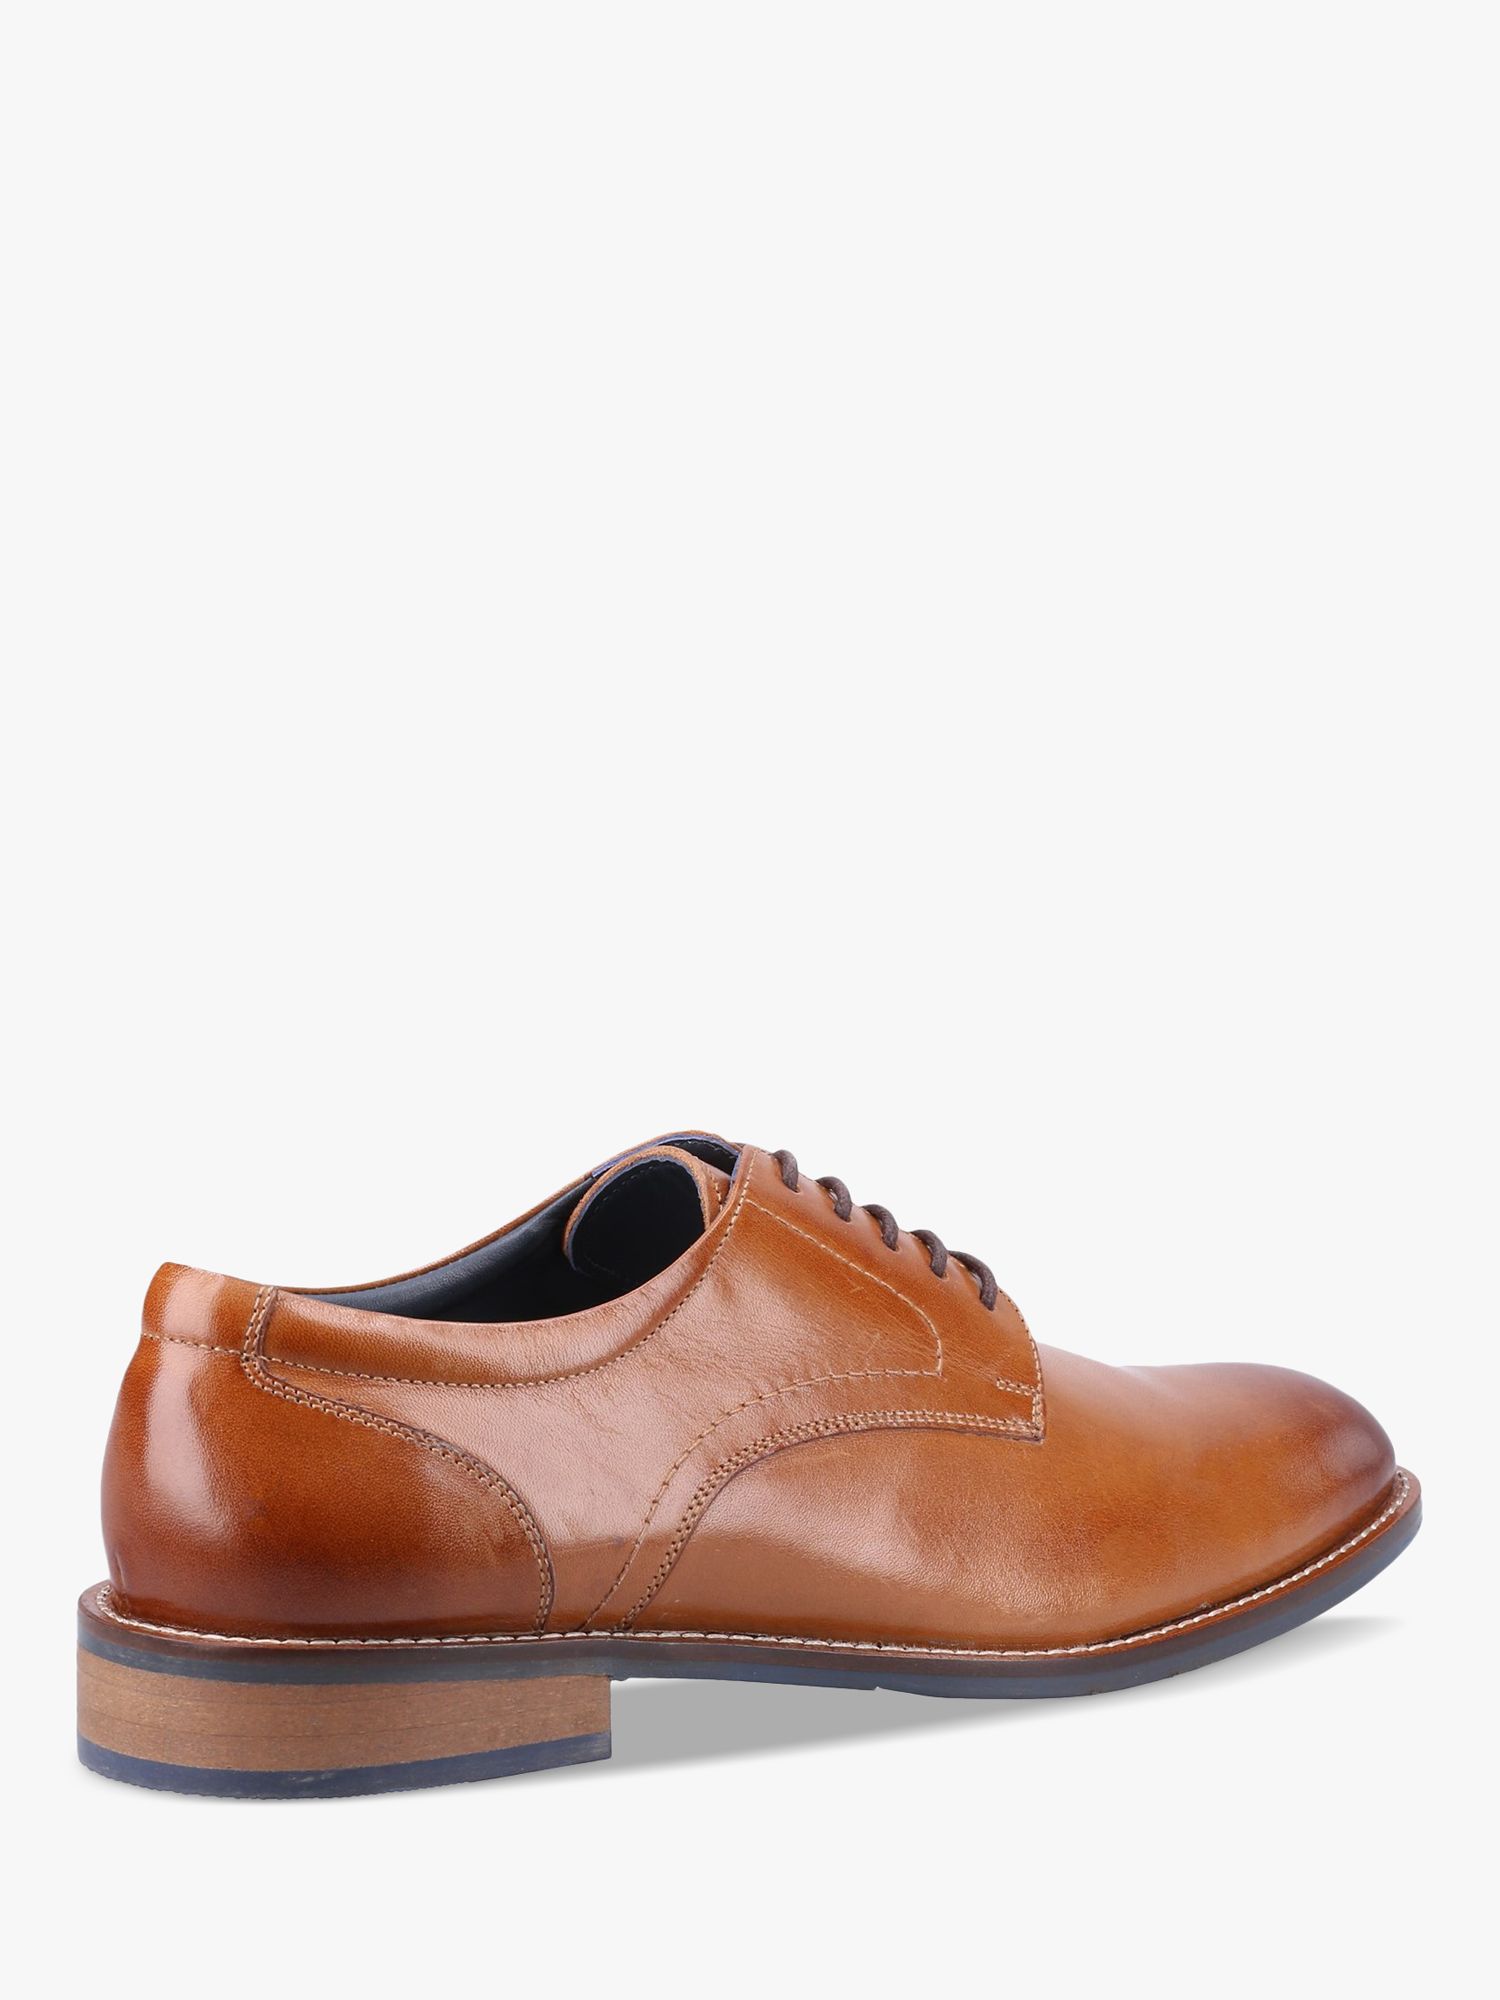 Hush Puppies Damien Leather Derby Shoes, Tan, 6